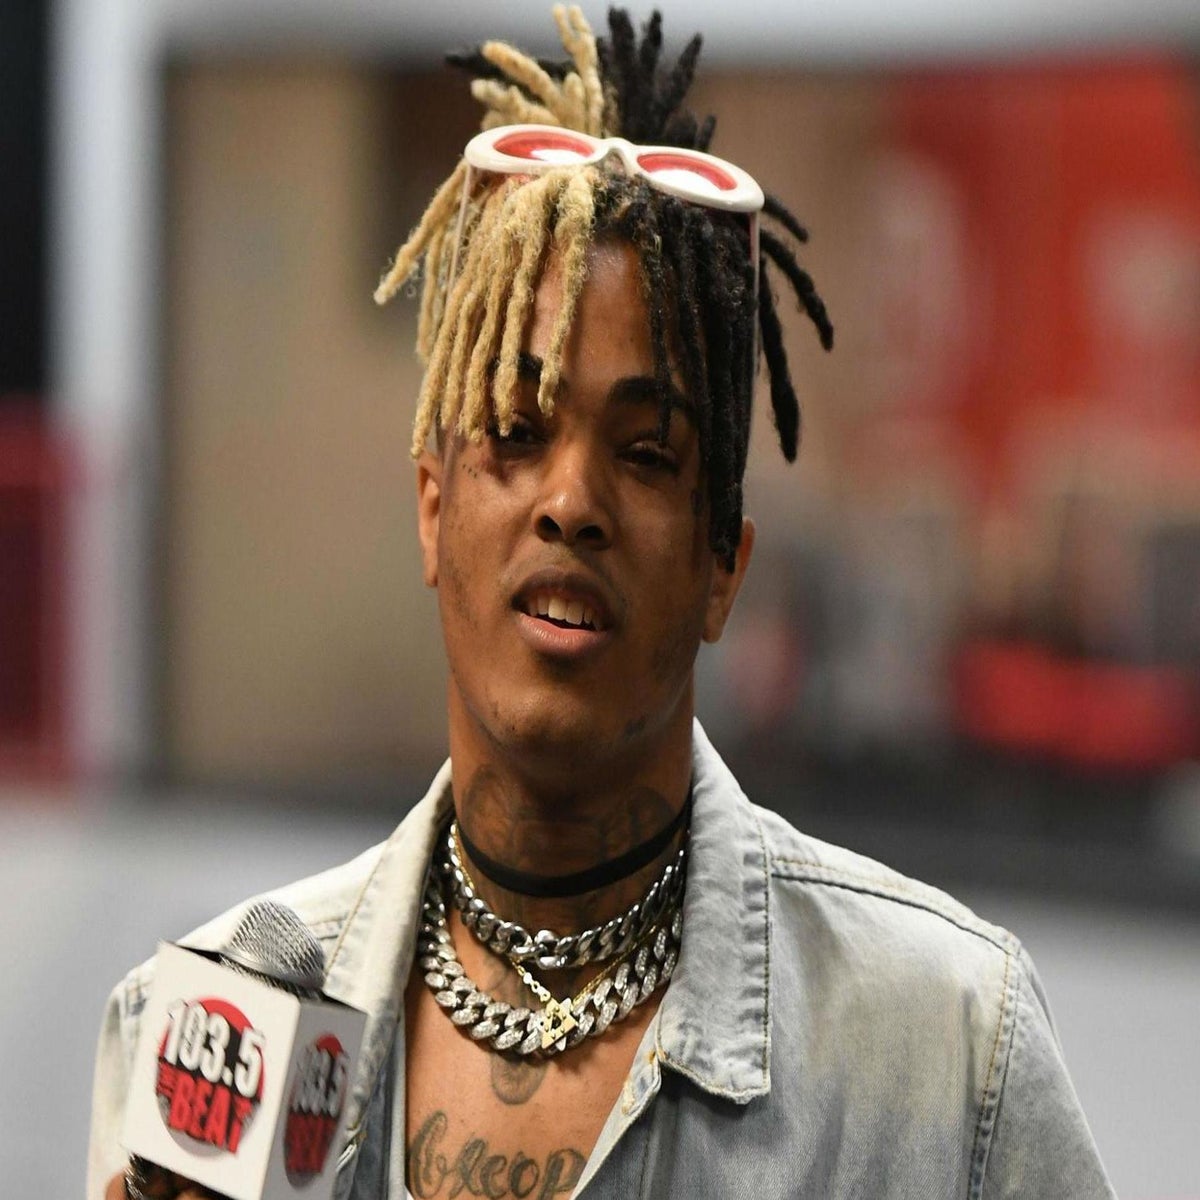 Gor Kore Rap Kora Xxx - XXXTentacion death: Rapper attends his own funeral in new posthumous music  video | The Independent | The Independent